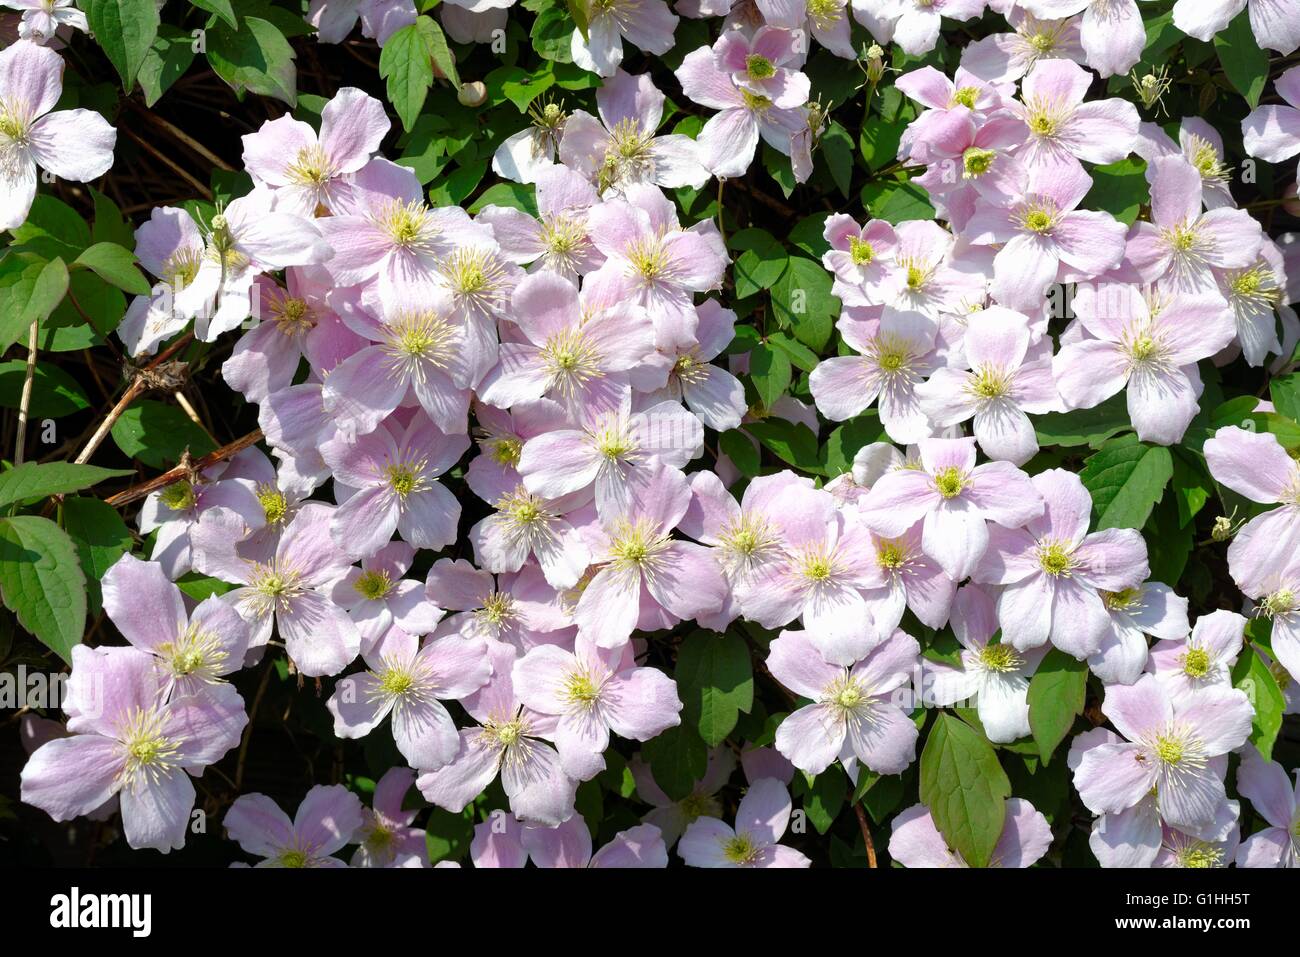 Close up of flowers on a Clematis Montana climbing plant Surrey UK Stock Photo